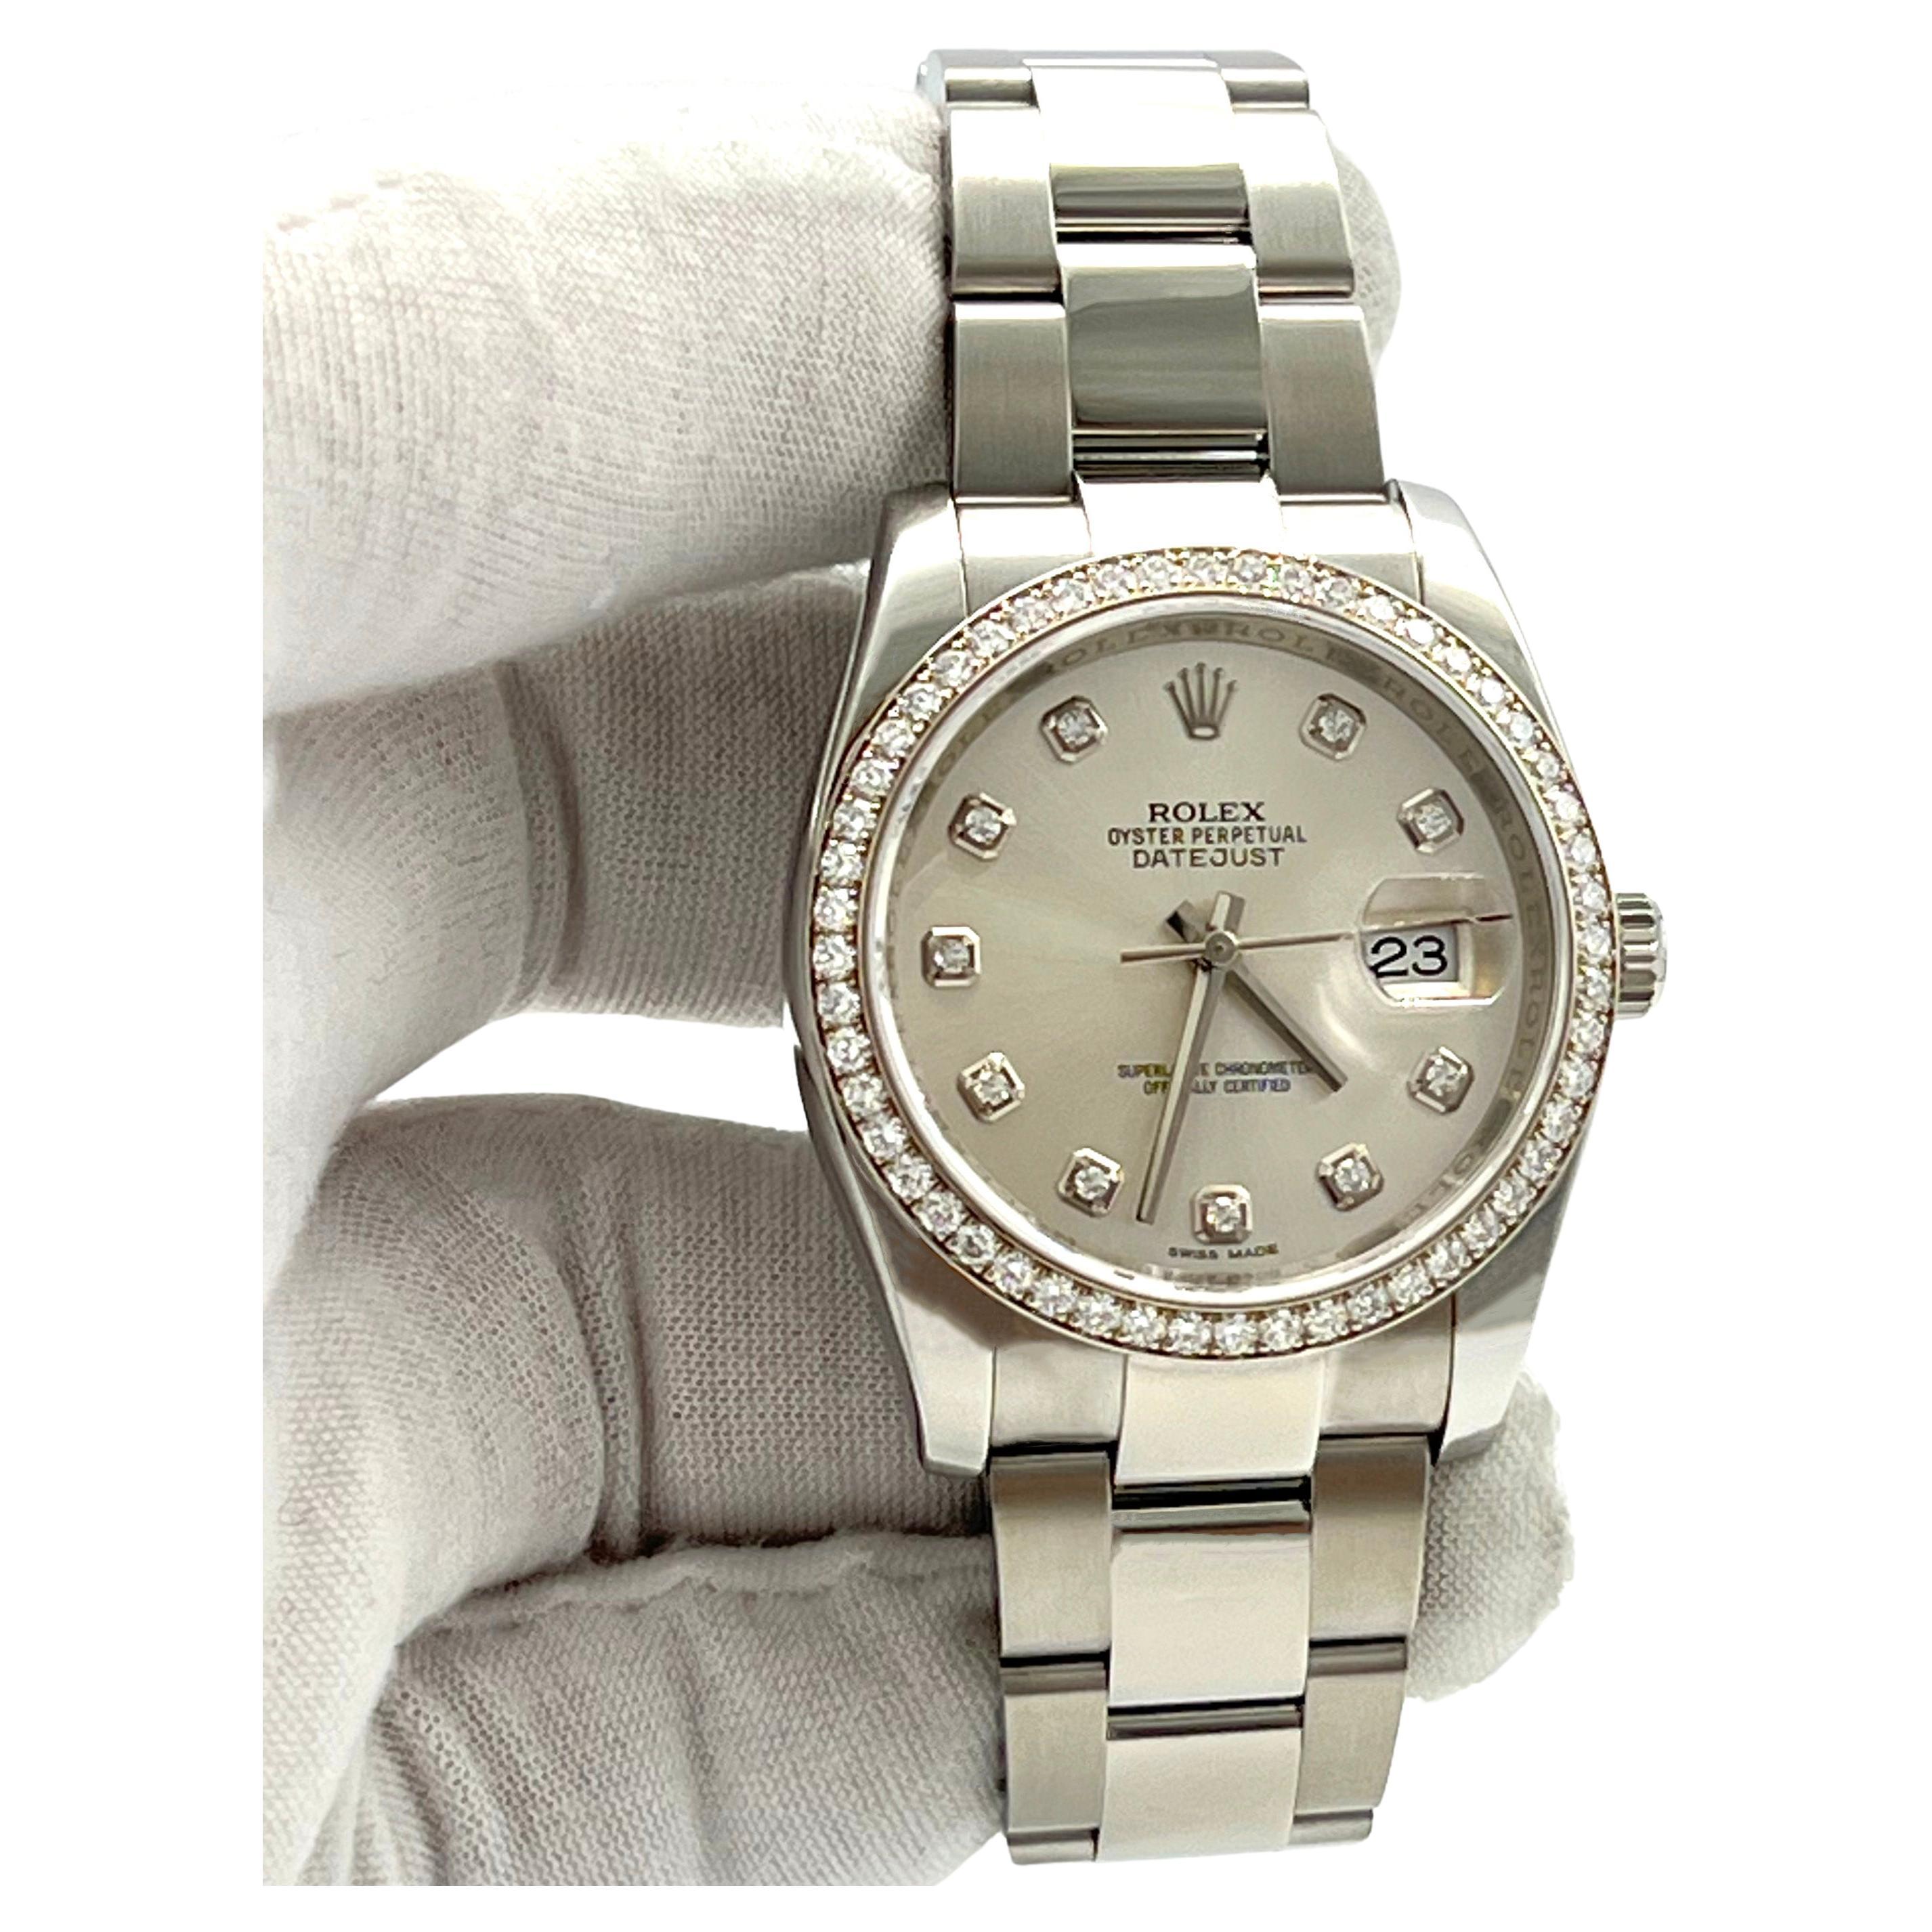 Rolex Datejust 36mm, Ref. 116244 For Sale